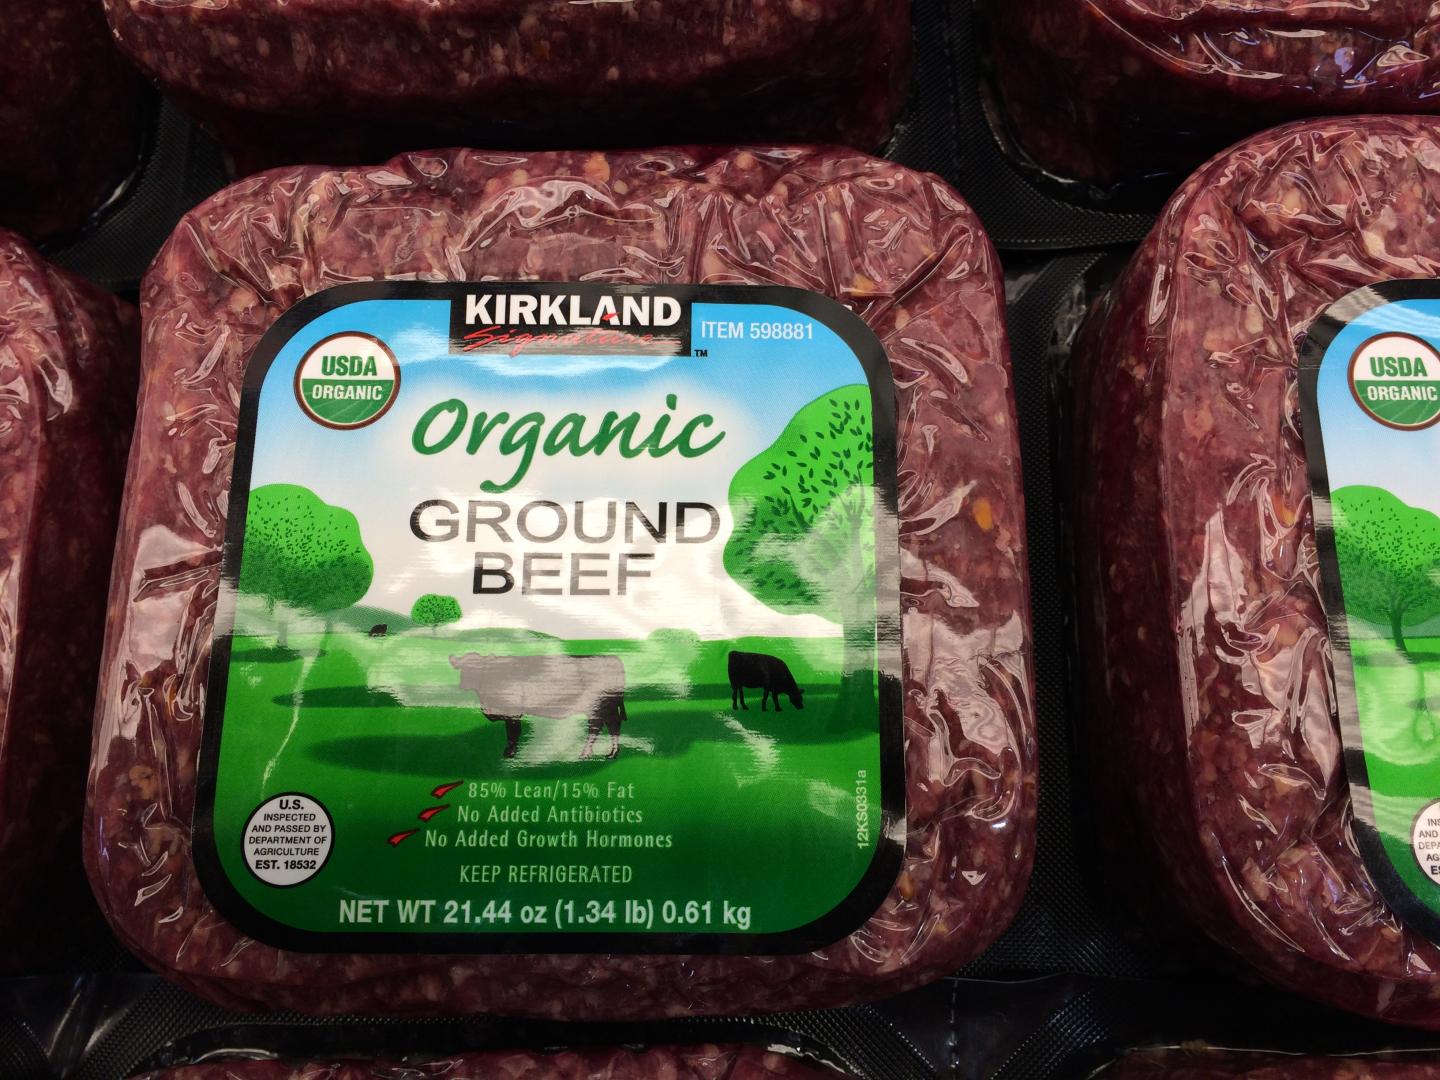 Example of Organic Beef Product with Several Production Attribute Claims on the Label